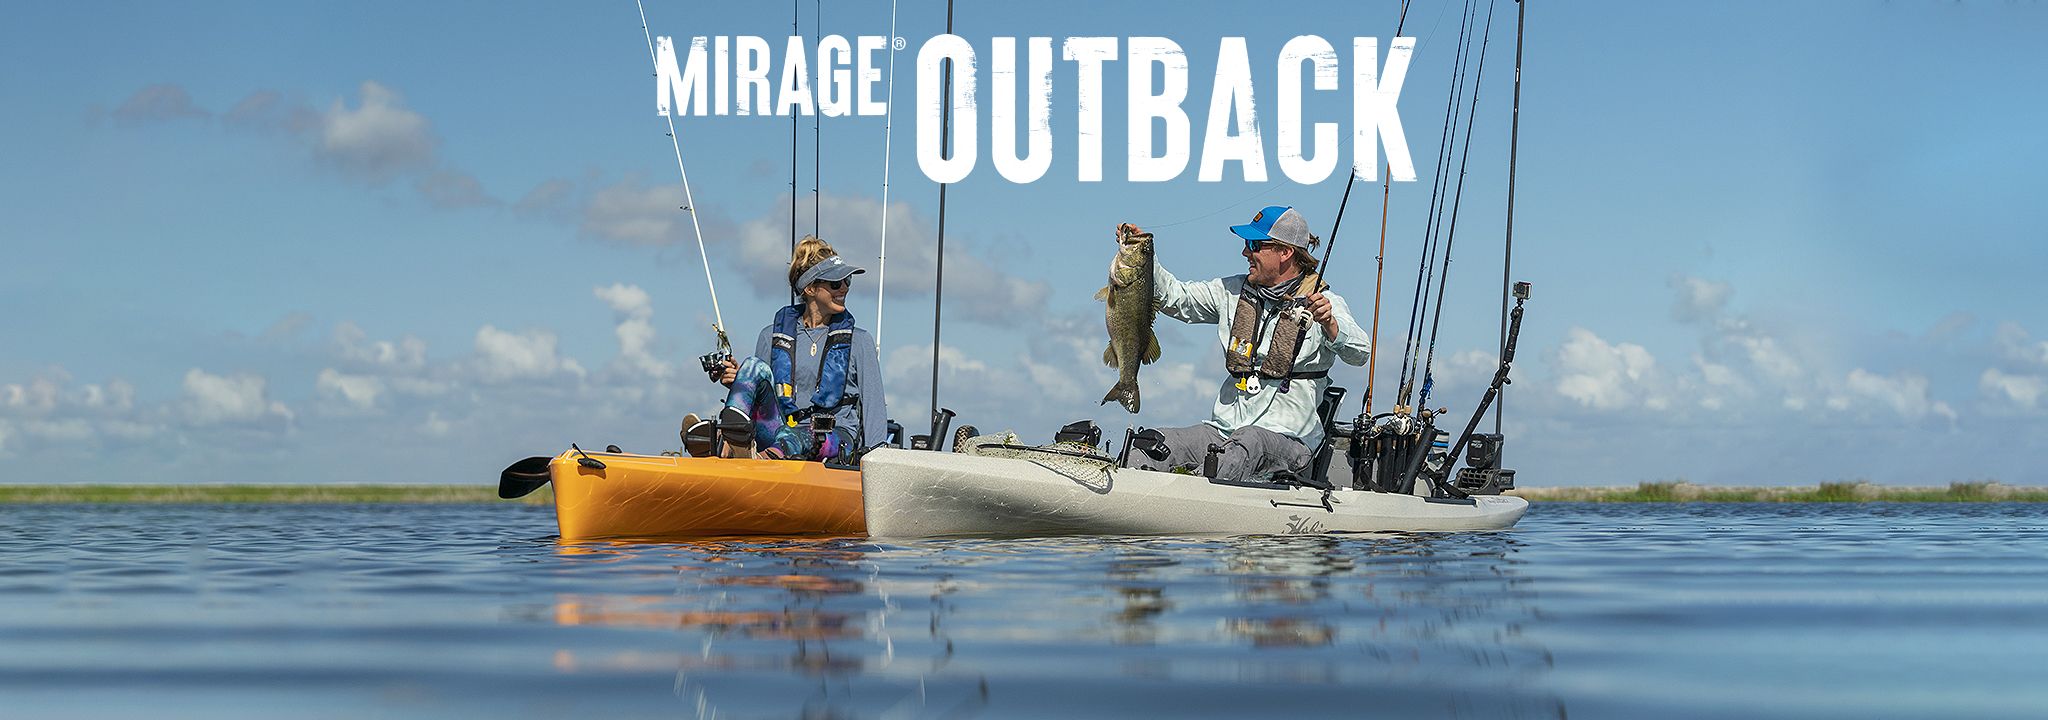 Mirage Outback: The World's #1 Pedal Fishing Kayak